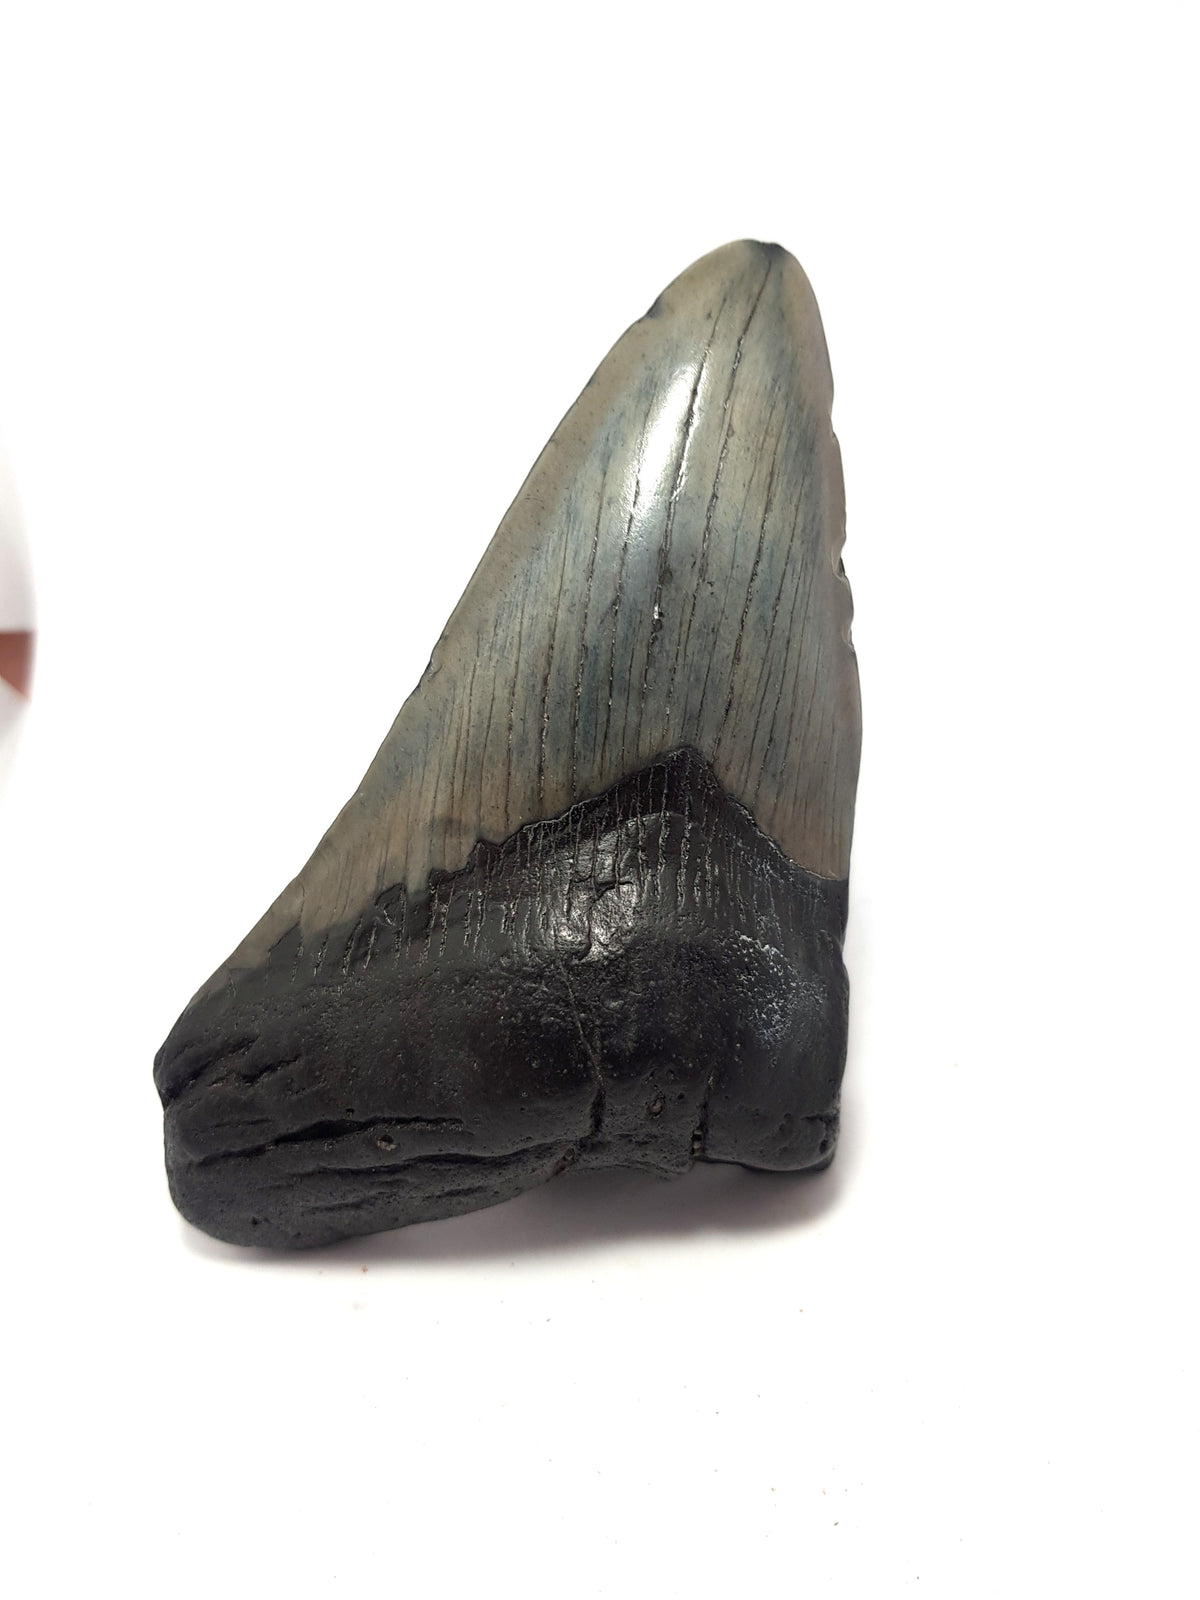 partial megalodon tooth. grey enamel present. Root material is black